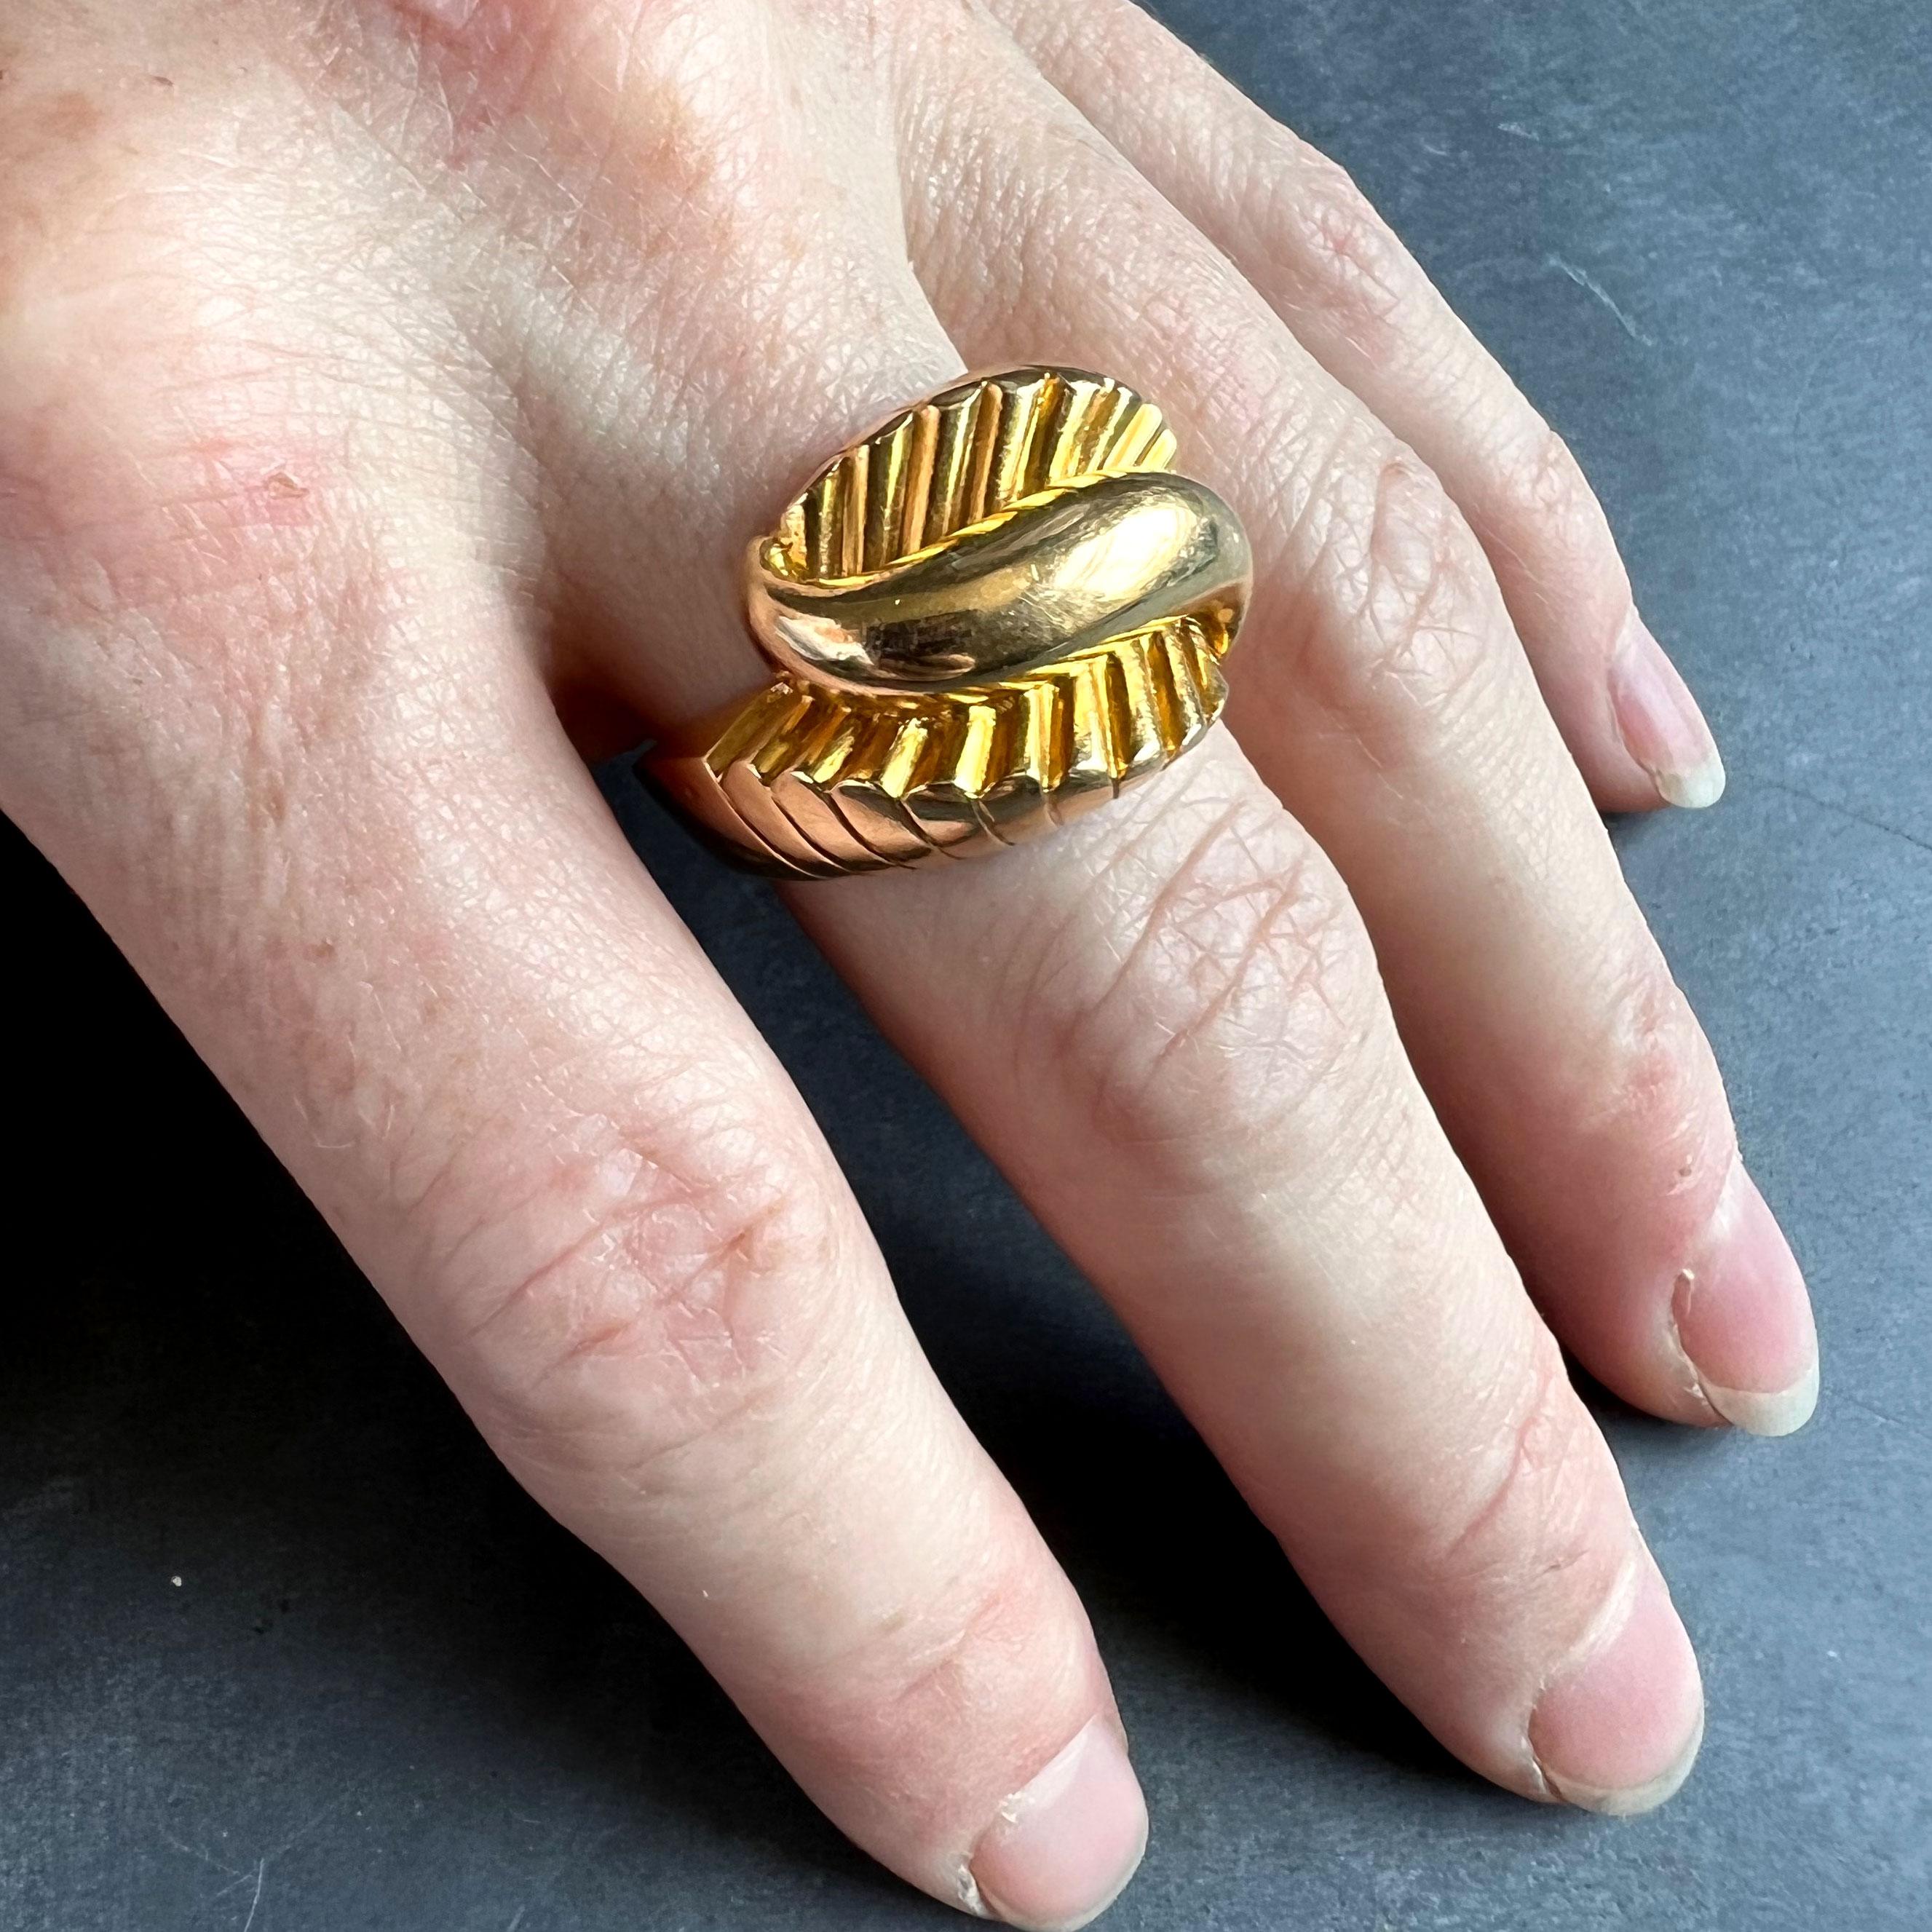 A French 18 karat (18K) yellow gold retro ring with large central swirl. Stamped with the eagles head for French manufacture and 18 karat gold.

Dimensions: 1.65 x 2.3 x 2.8 cm 
Ring Size: US - 8.25 (UK - Q)
Weight: 11.82 grams
